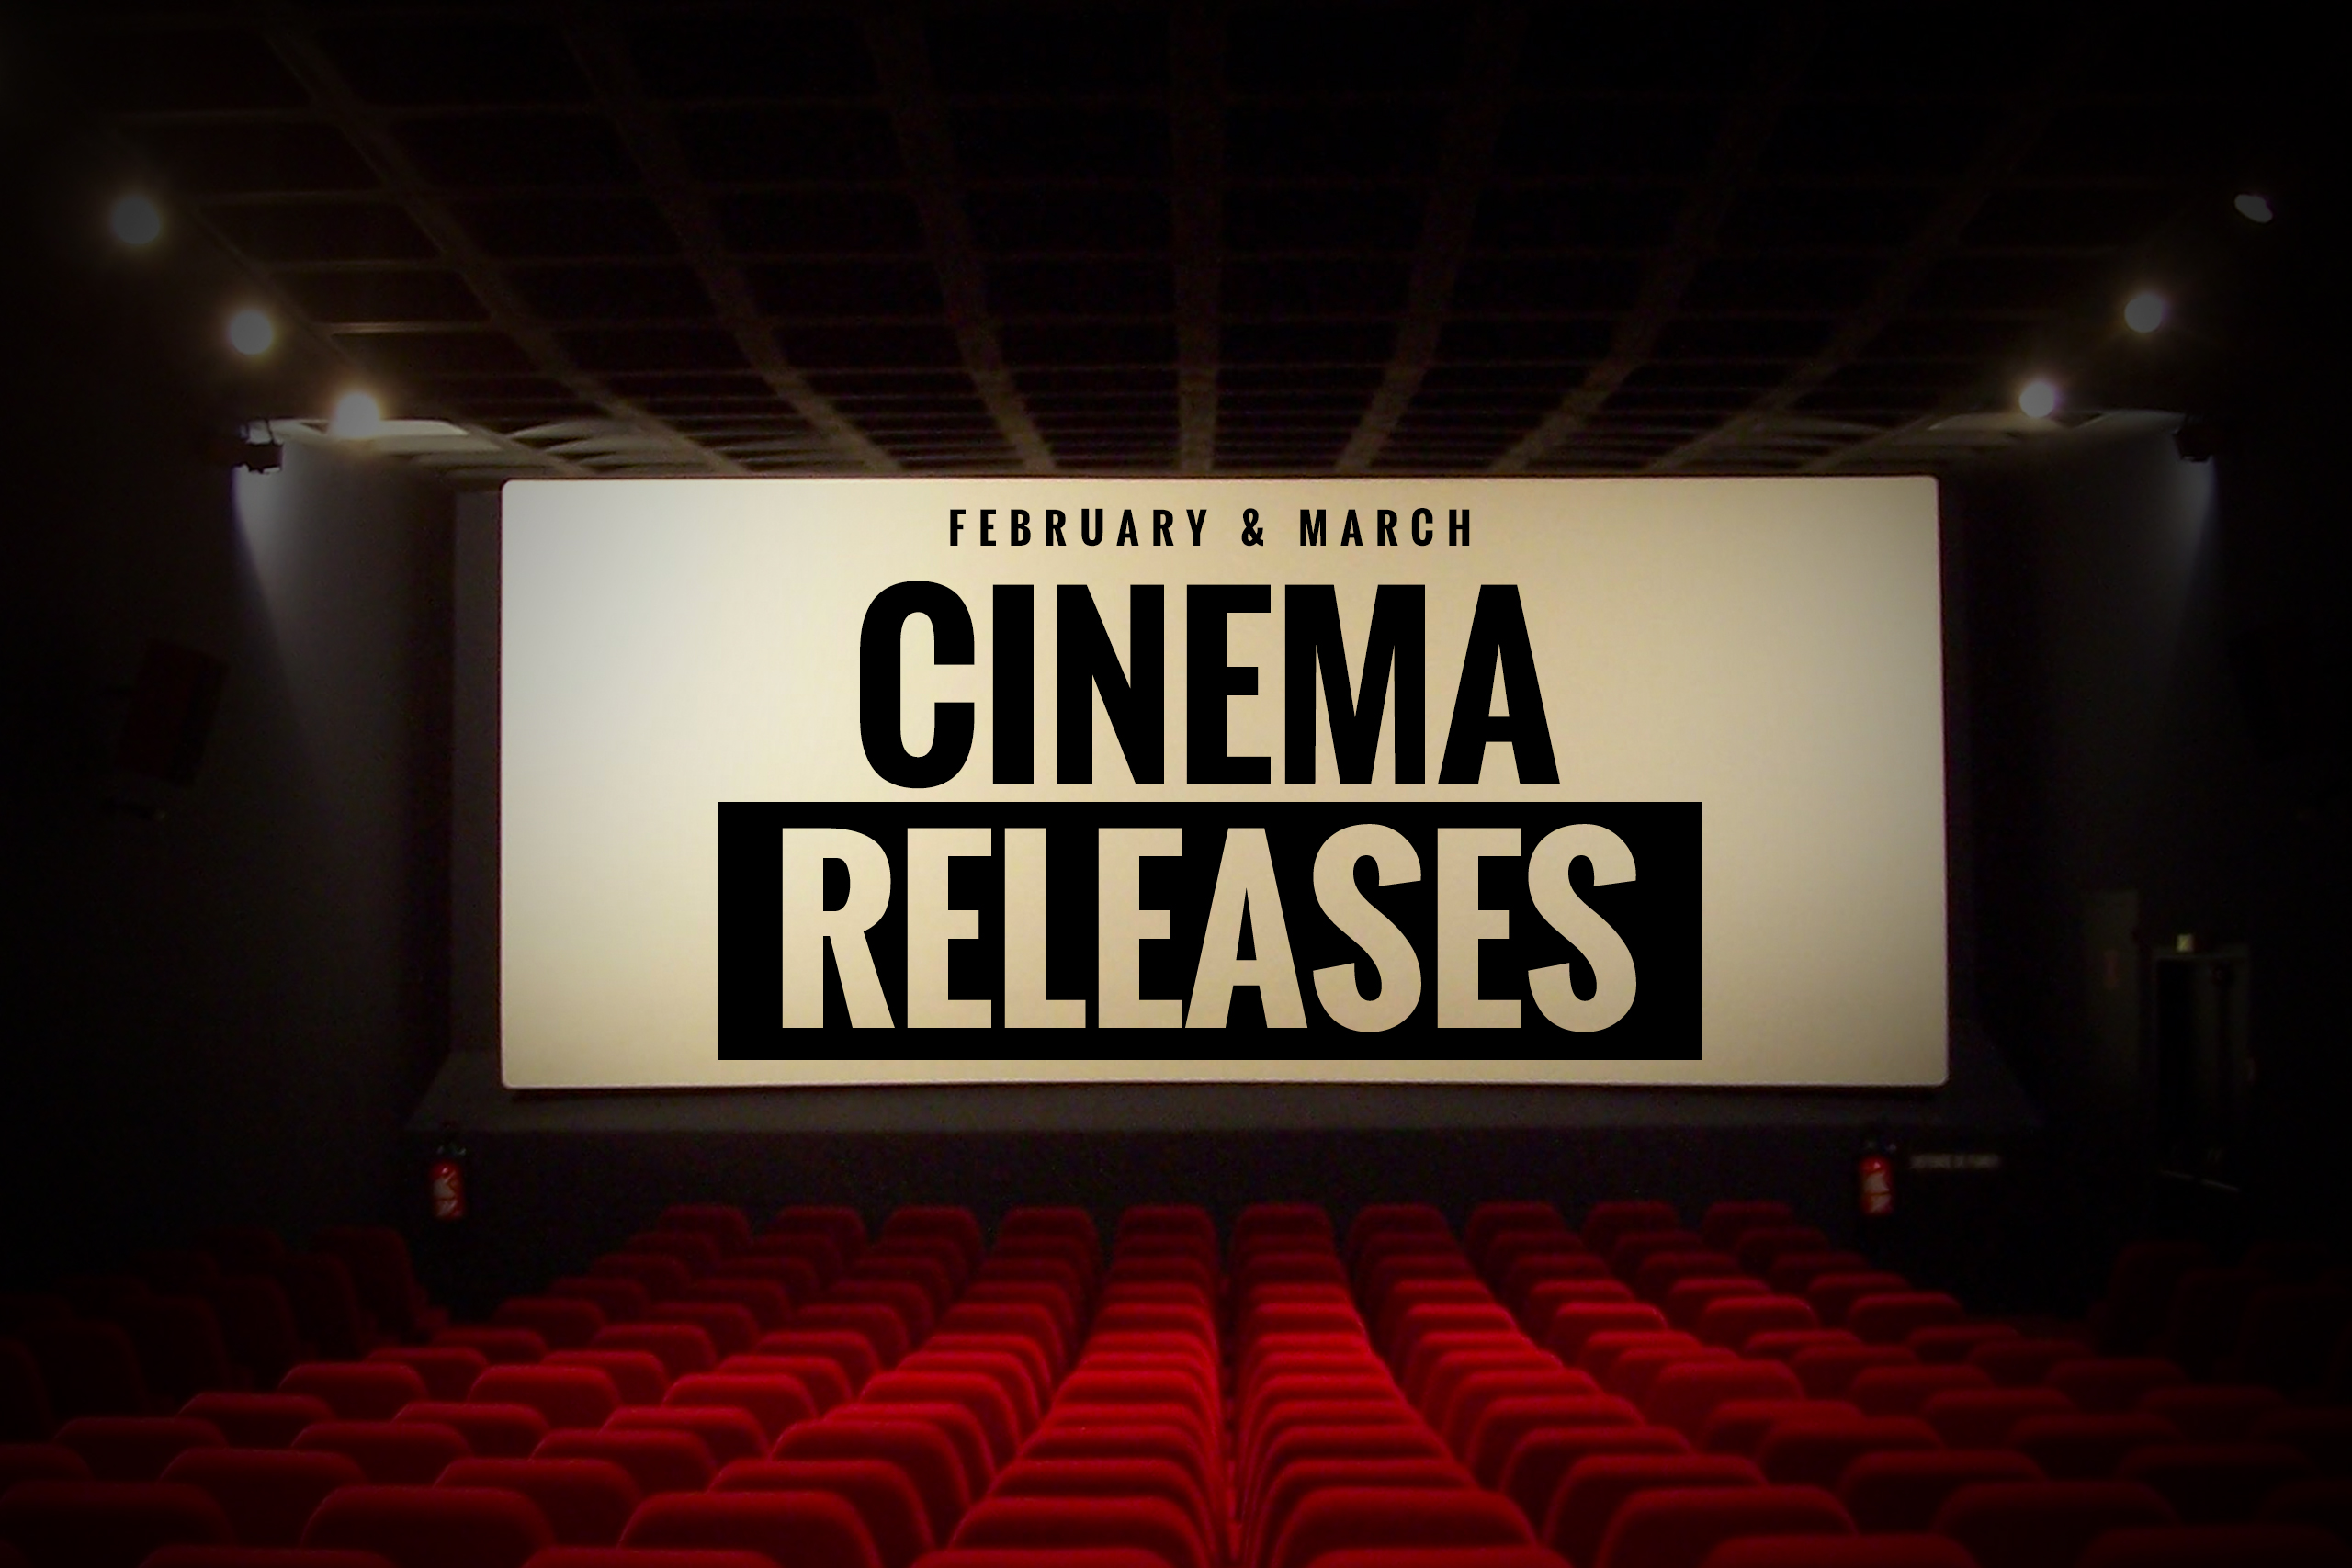 Unmissable February / March Film Releases